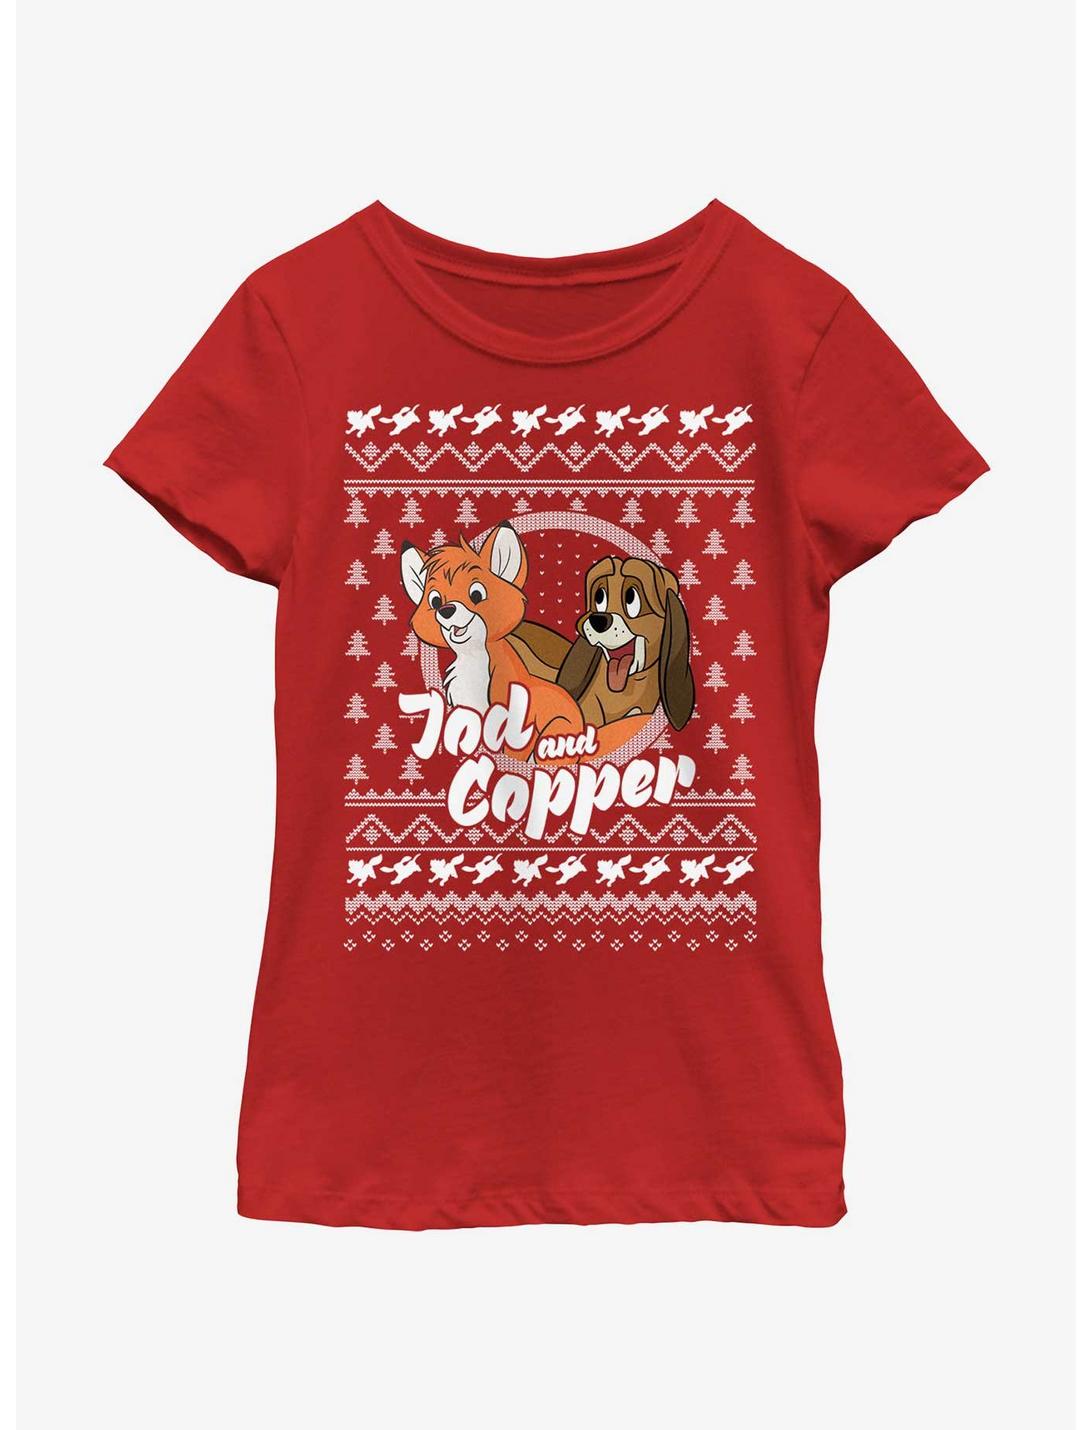 Disney The Fox and the Hound Tod and Copper Ugly Christmas Youth Girls T-Shirt, RED, hi-res